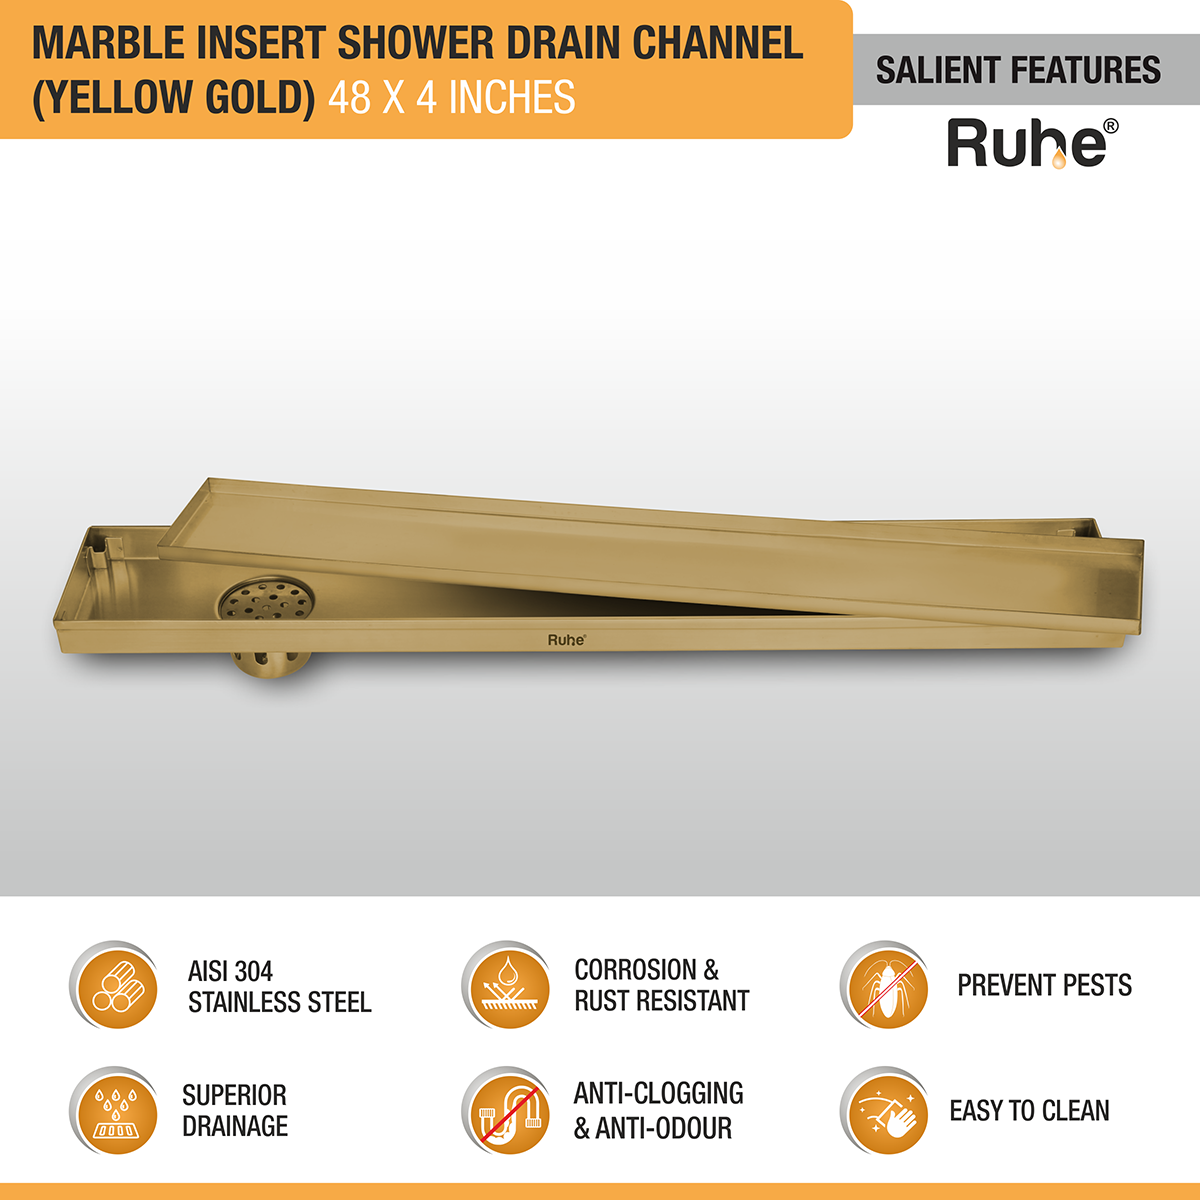 Marble Insert Shower Drain Channel (48 x 4 Inches) YELLOW GOLD PVD Coated features and benefits